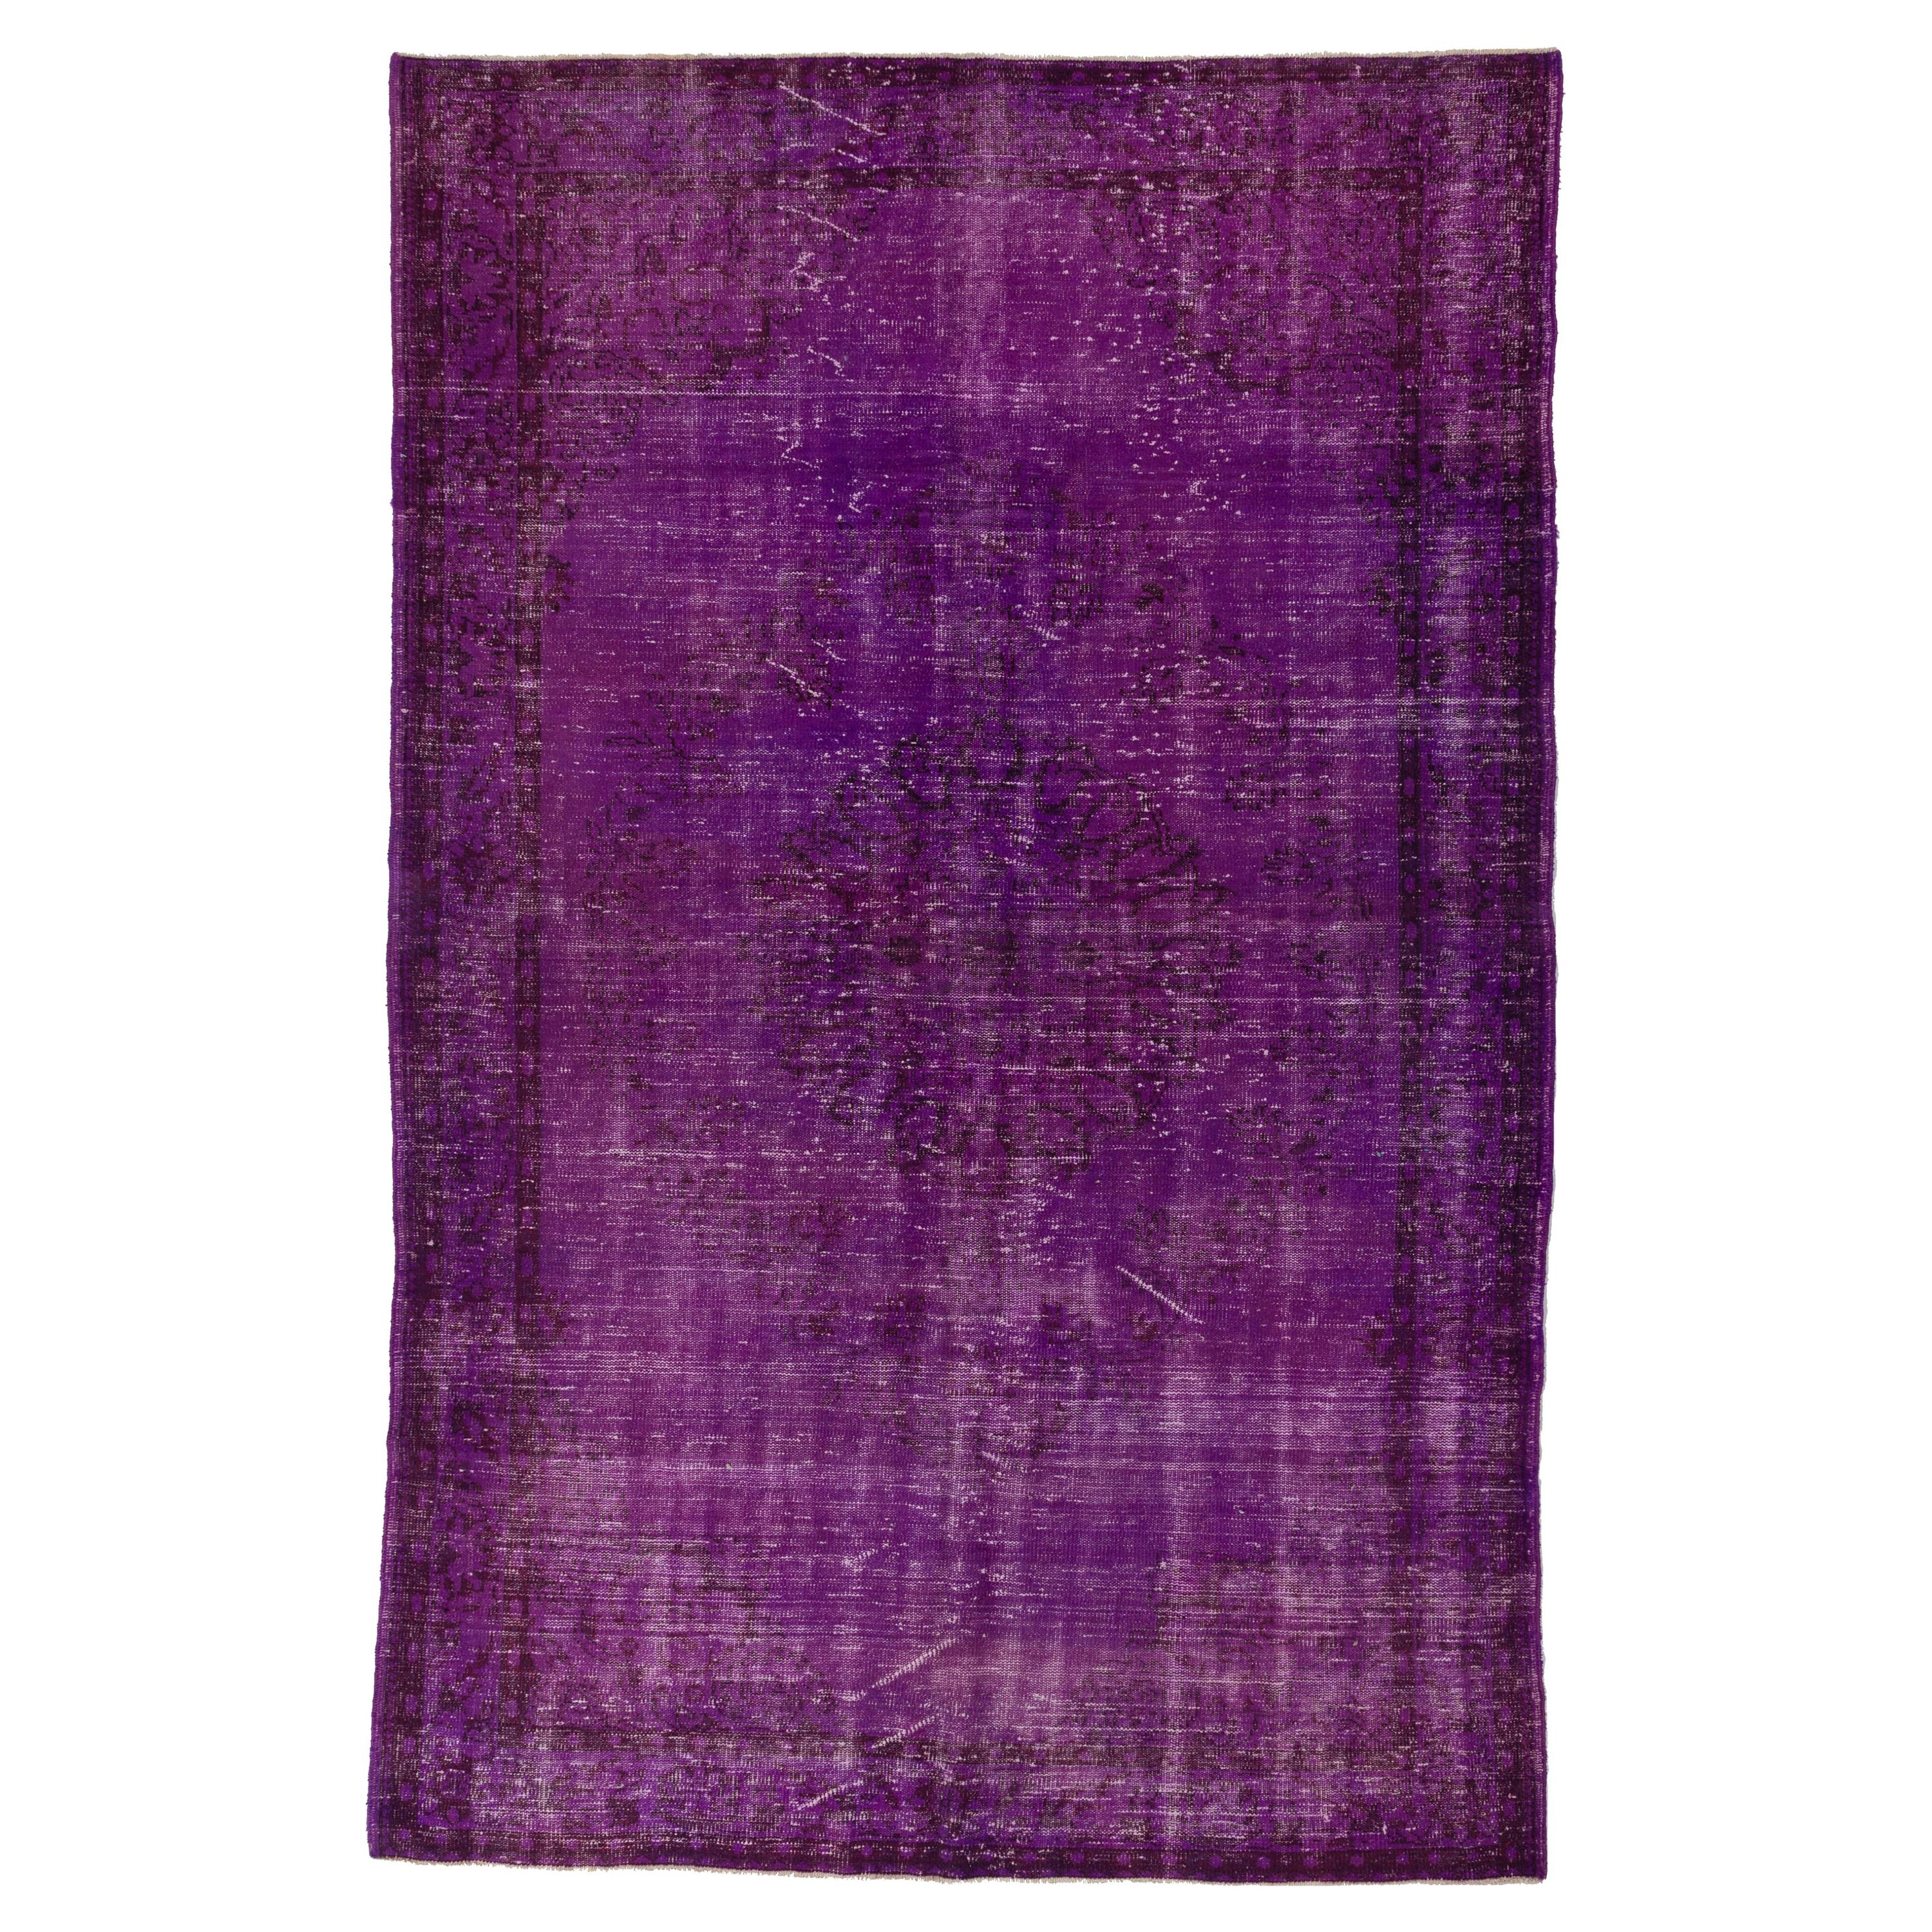 6.5x10 Ft Vintage Turkish Area Rug Over-Dyed in Purple for Modern Interiors